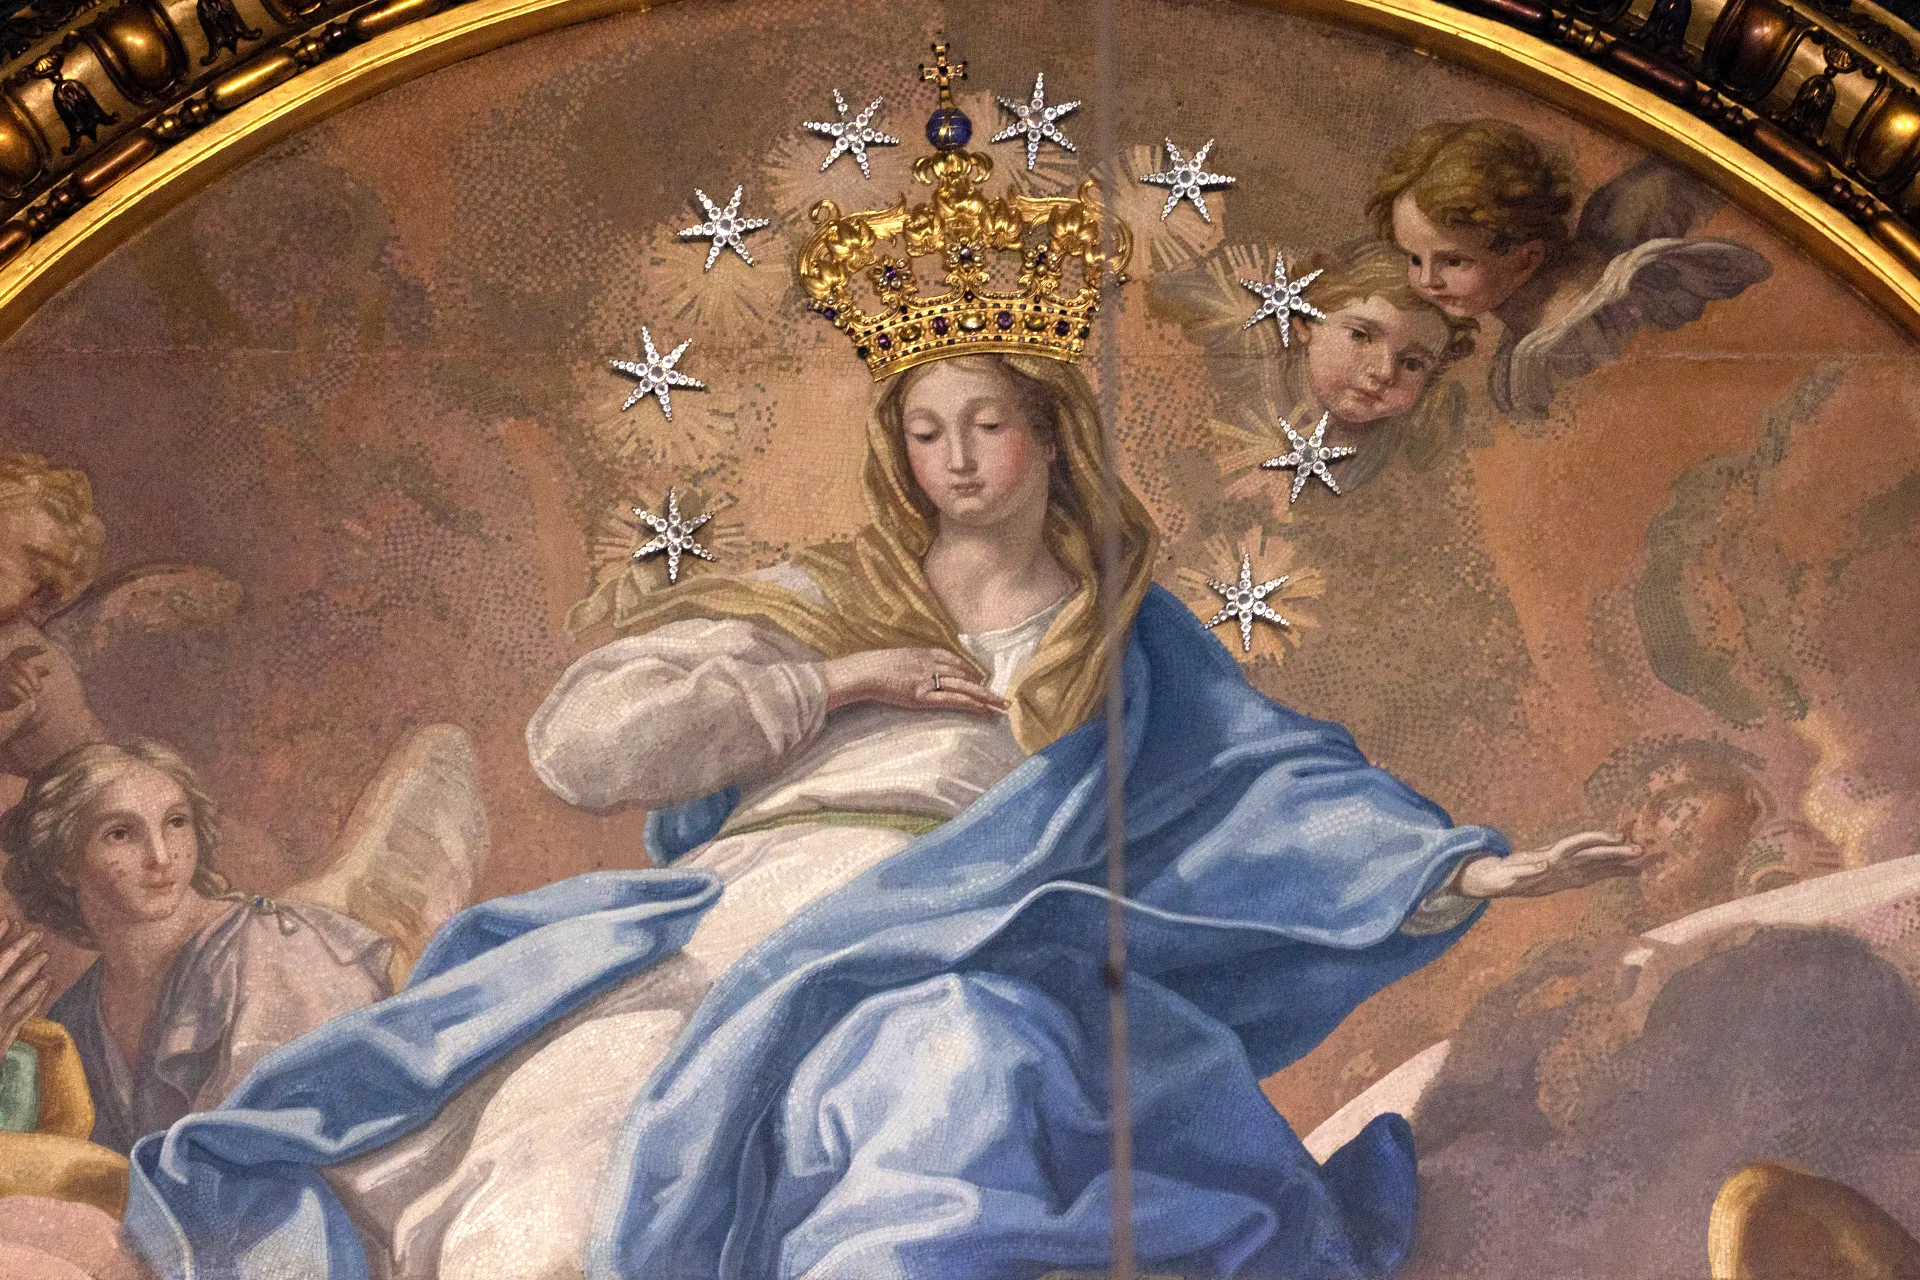 When Pope Pius IX declared the doctrine of the Immaculate Conception of the Virgin Mary on Dec. 8, 1854, he had a golden crown added to the mosaic of Mary, Virgin Immaculate, in the Chapel of the Choir in St. Peter's Basilica.?w=200&h=150